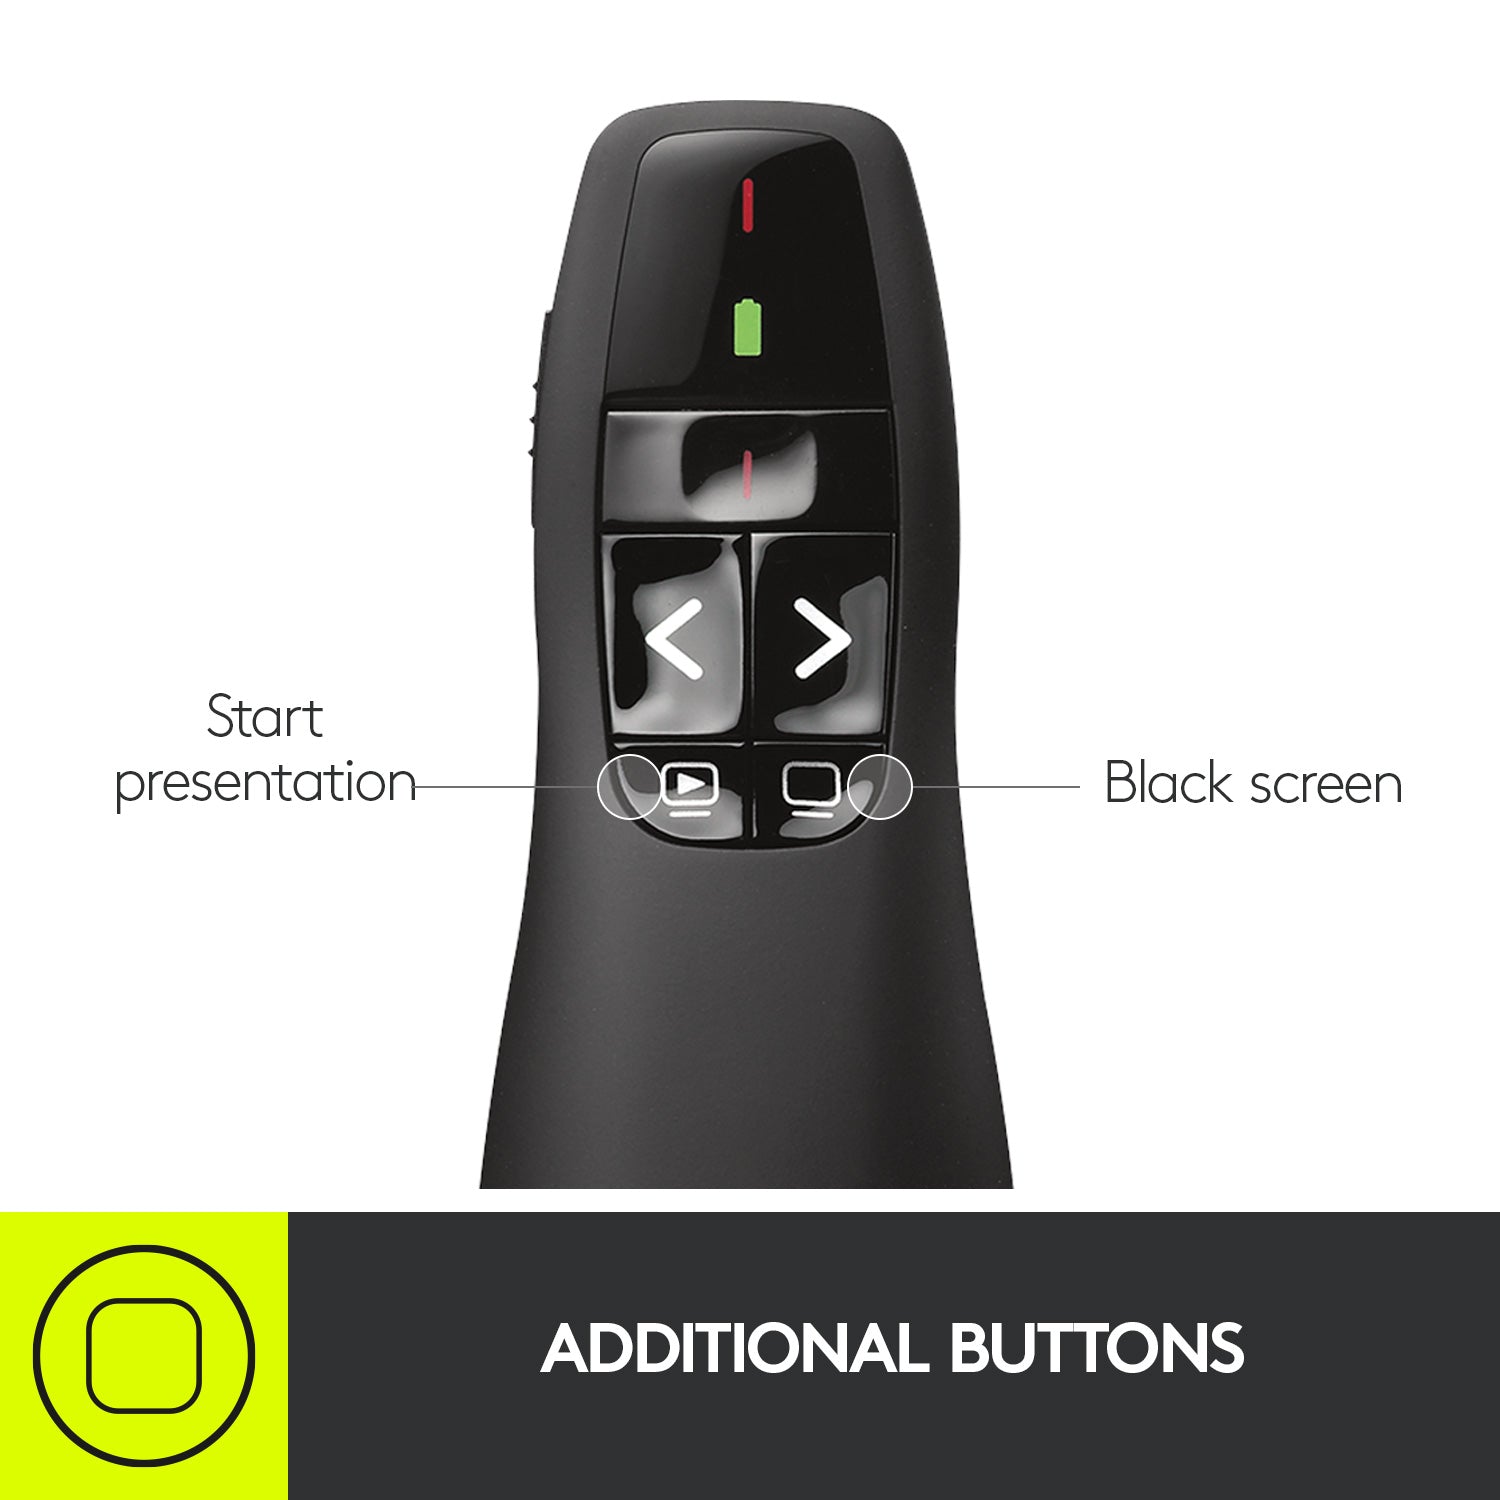 Logitech Professional Presenter R800, Wireless Presentation Clicker Remote  with Green Laser Pointer and LCD Display - Micro Center